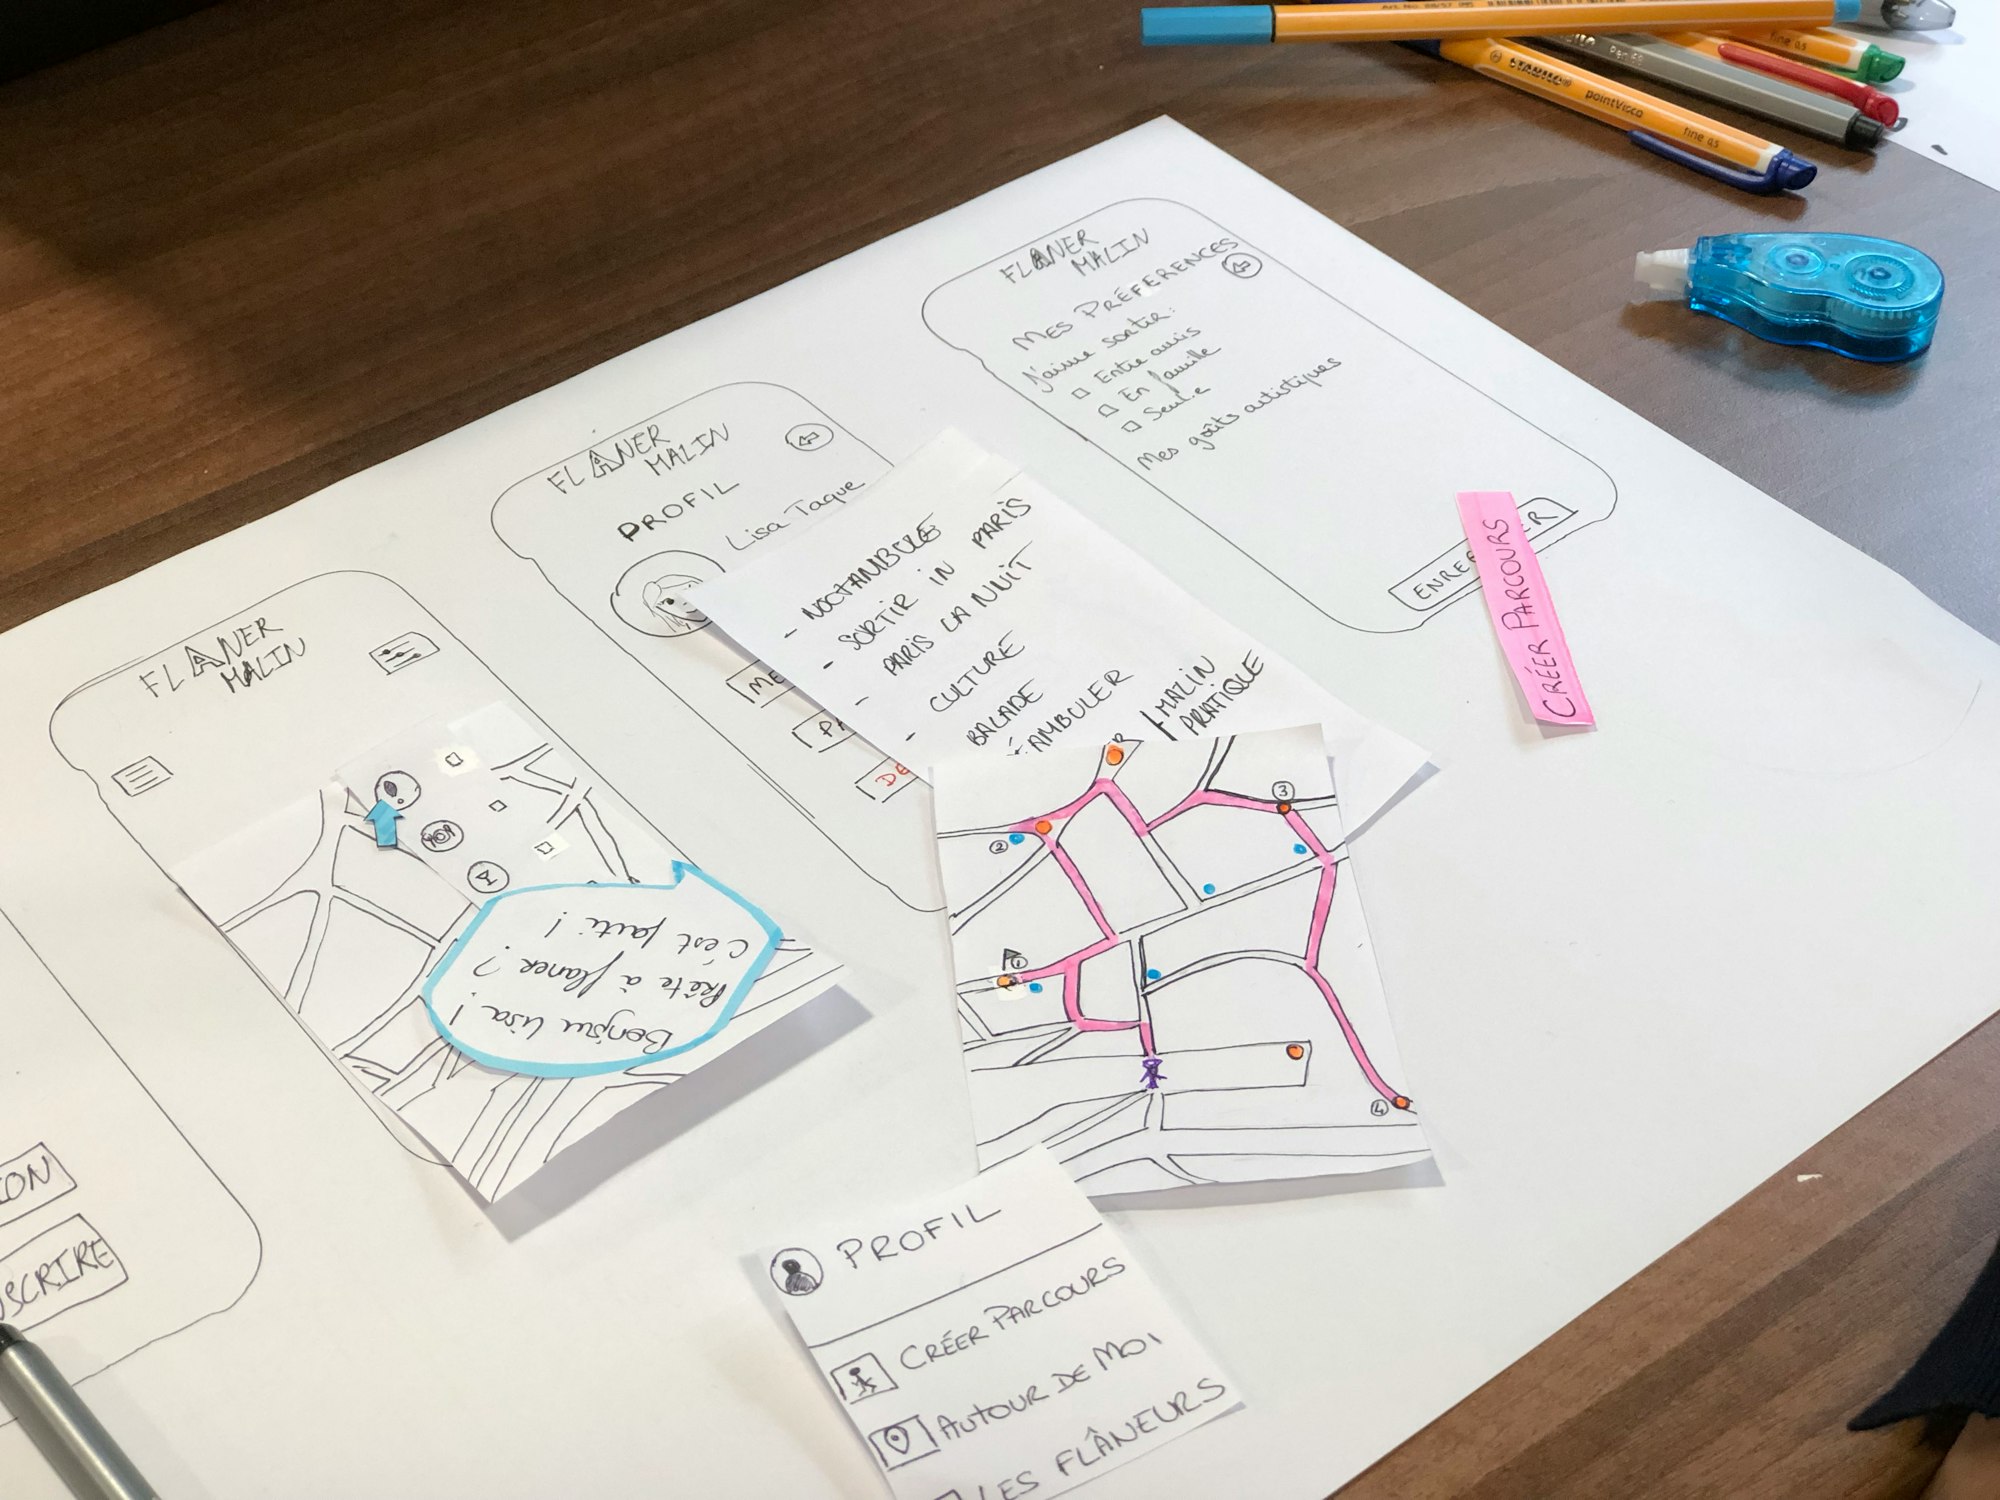 How to create a UX research team on your own